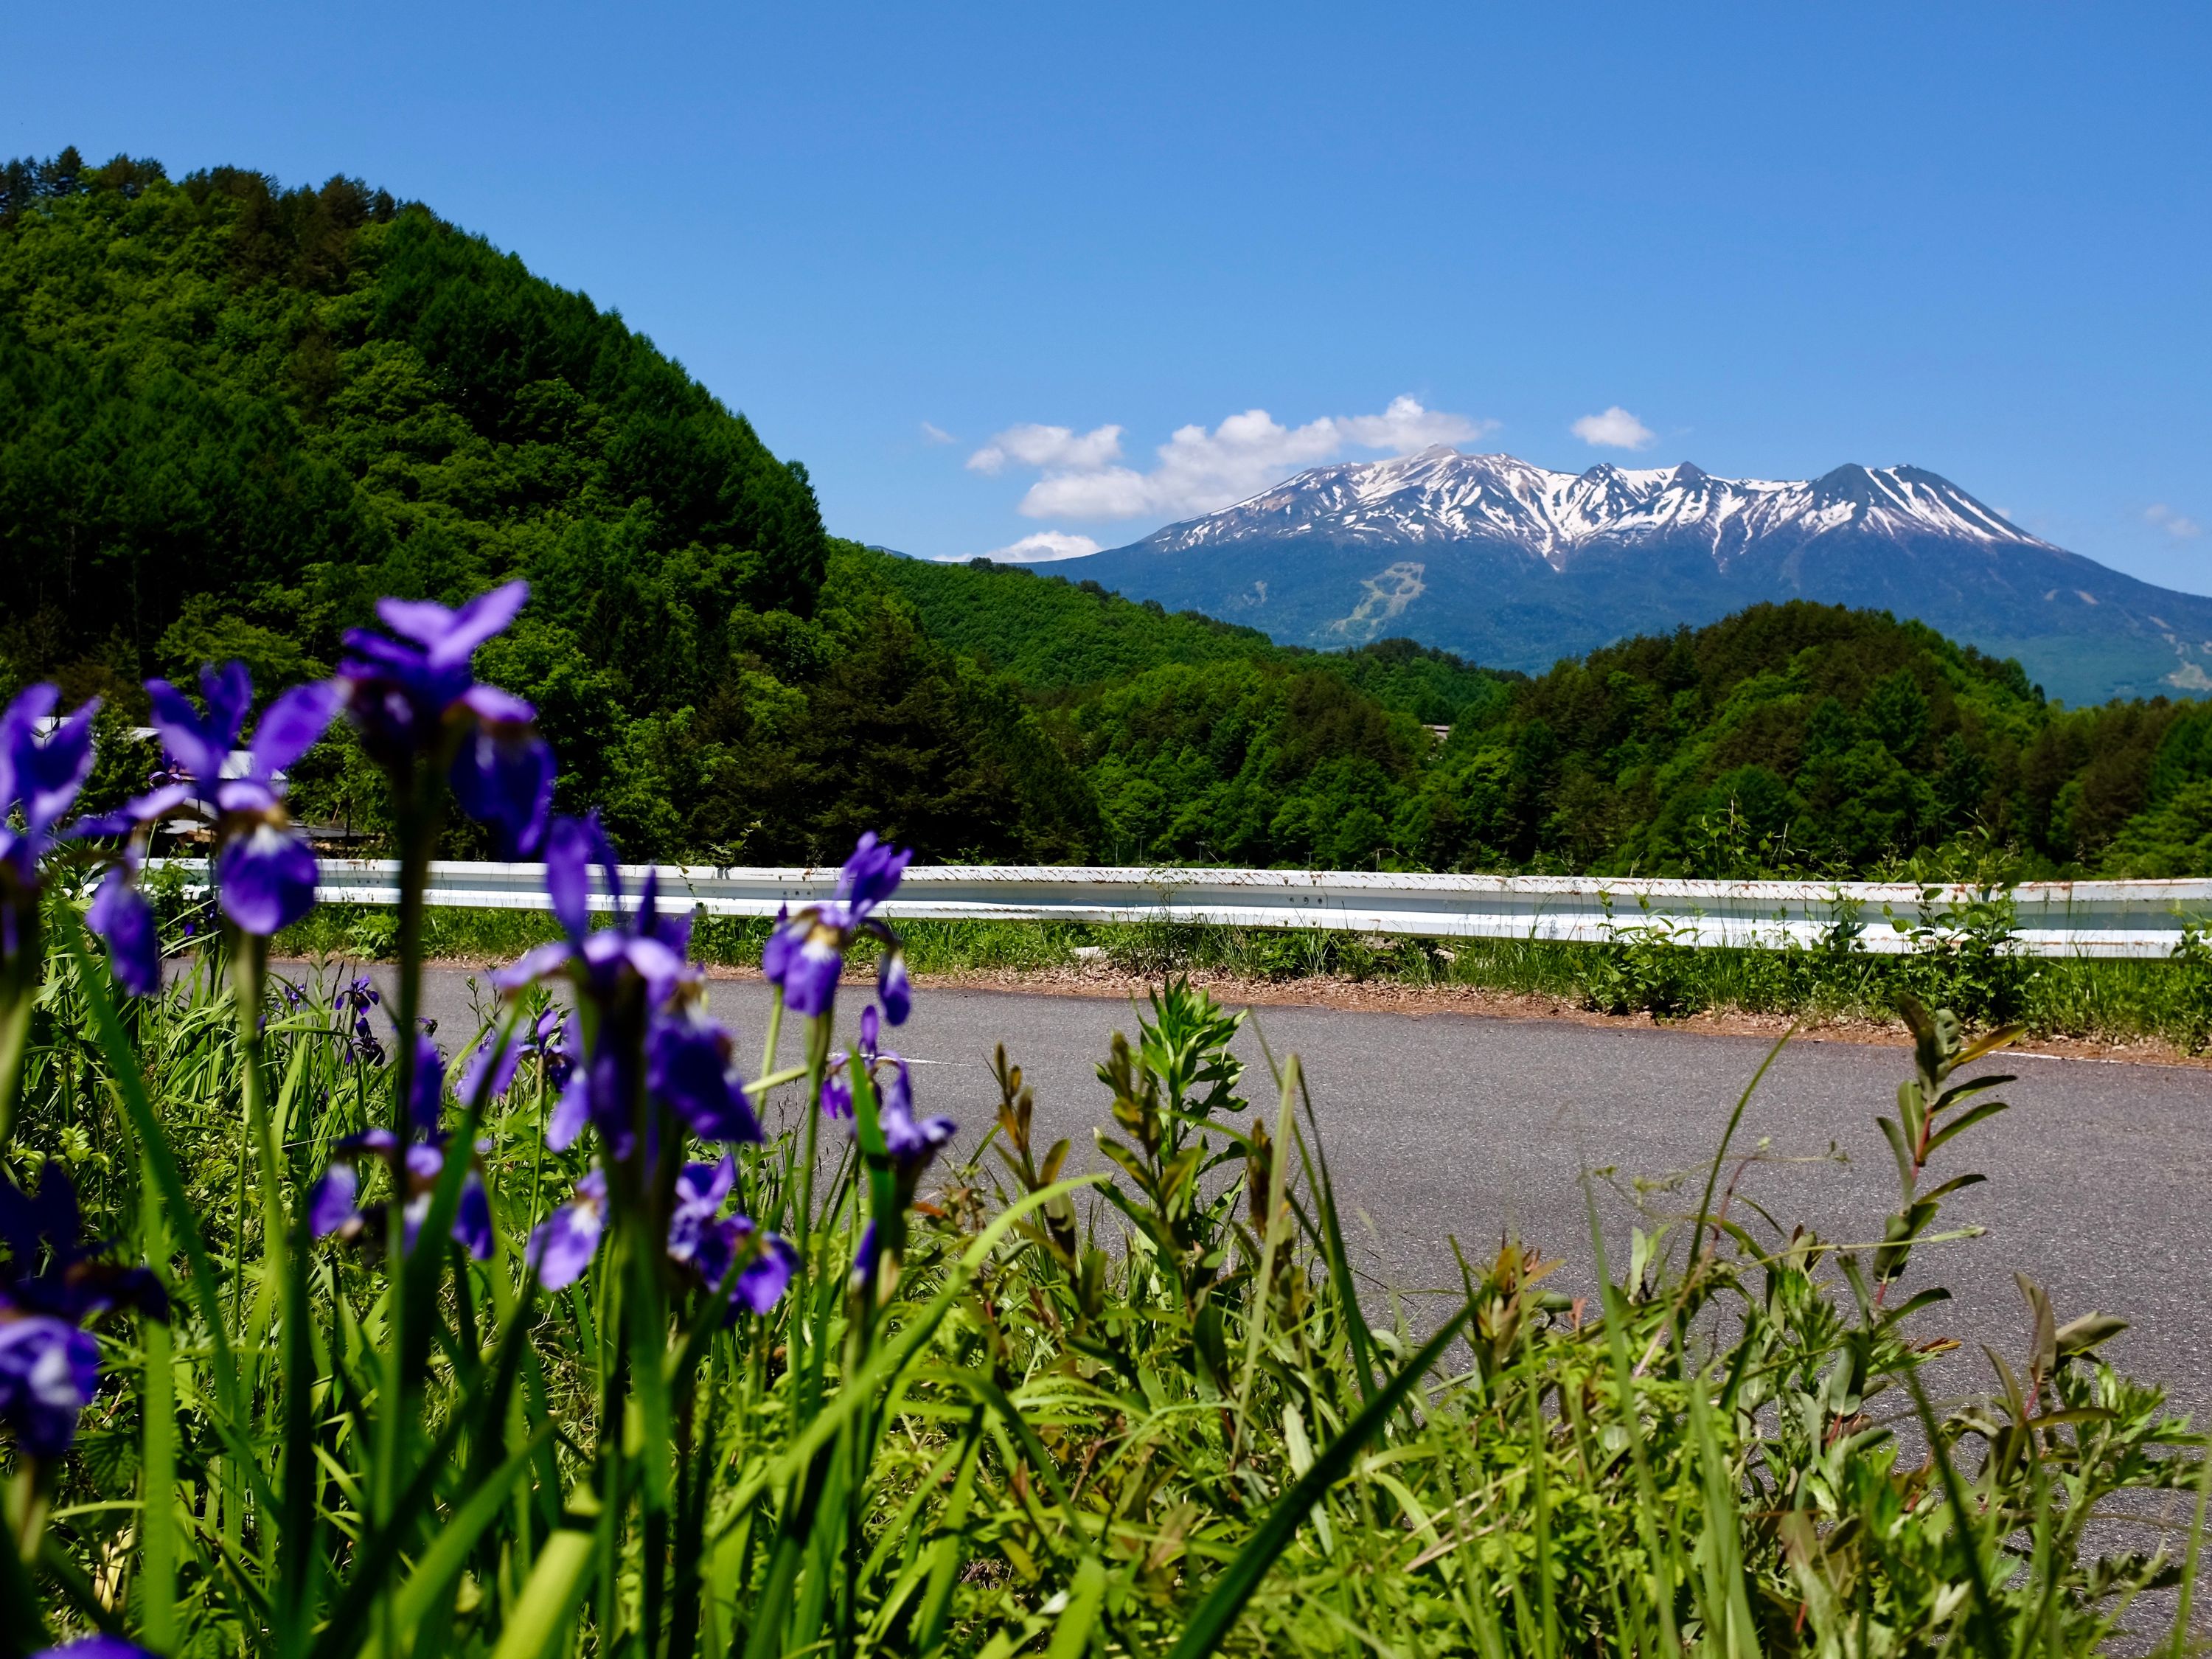 Mount Ontake against forested hillsides and purple irises in the foreground.